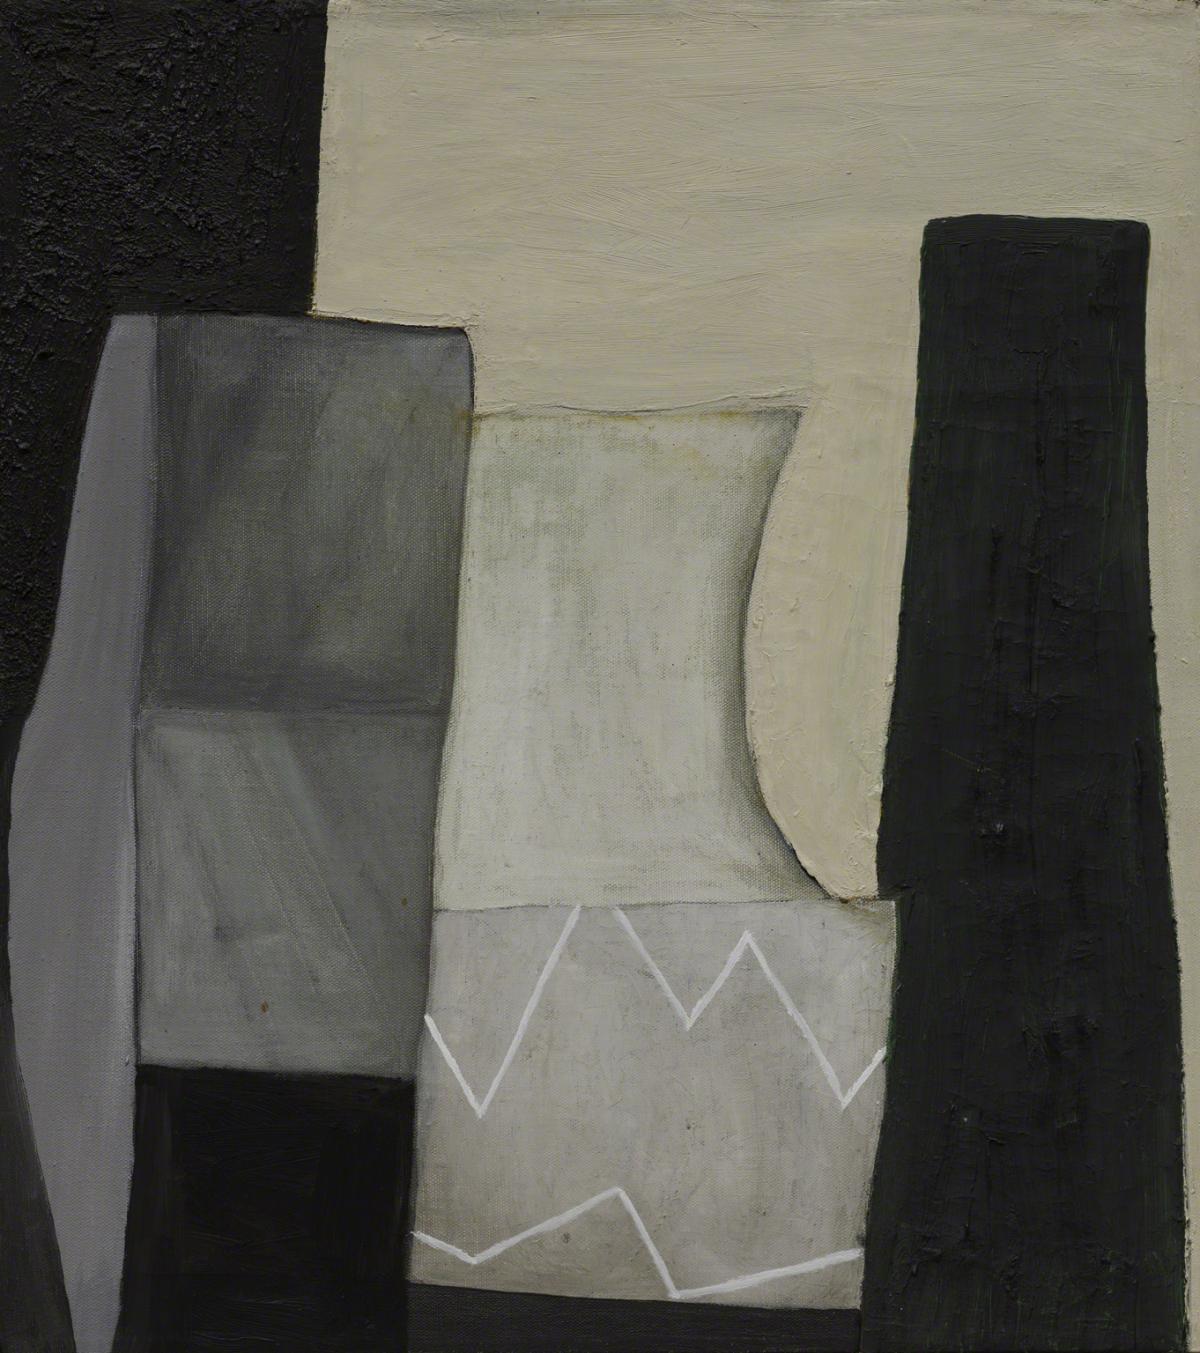 Abstract painting with shapes in various sizes in black, white, and grey